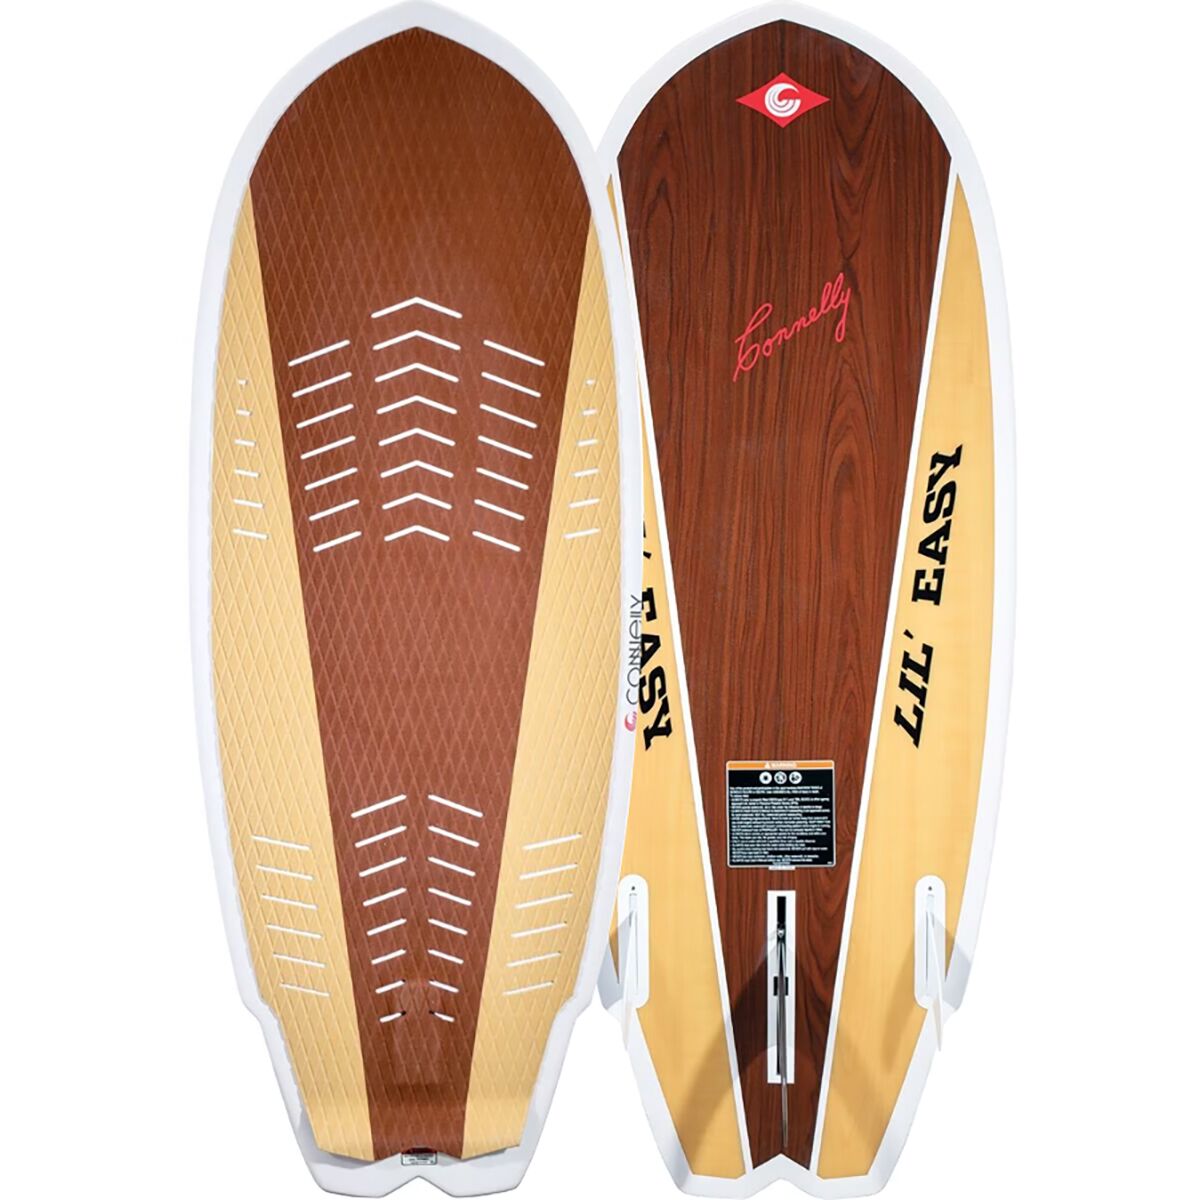 Connelly Skis Lil Easy Wakesurf Board